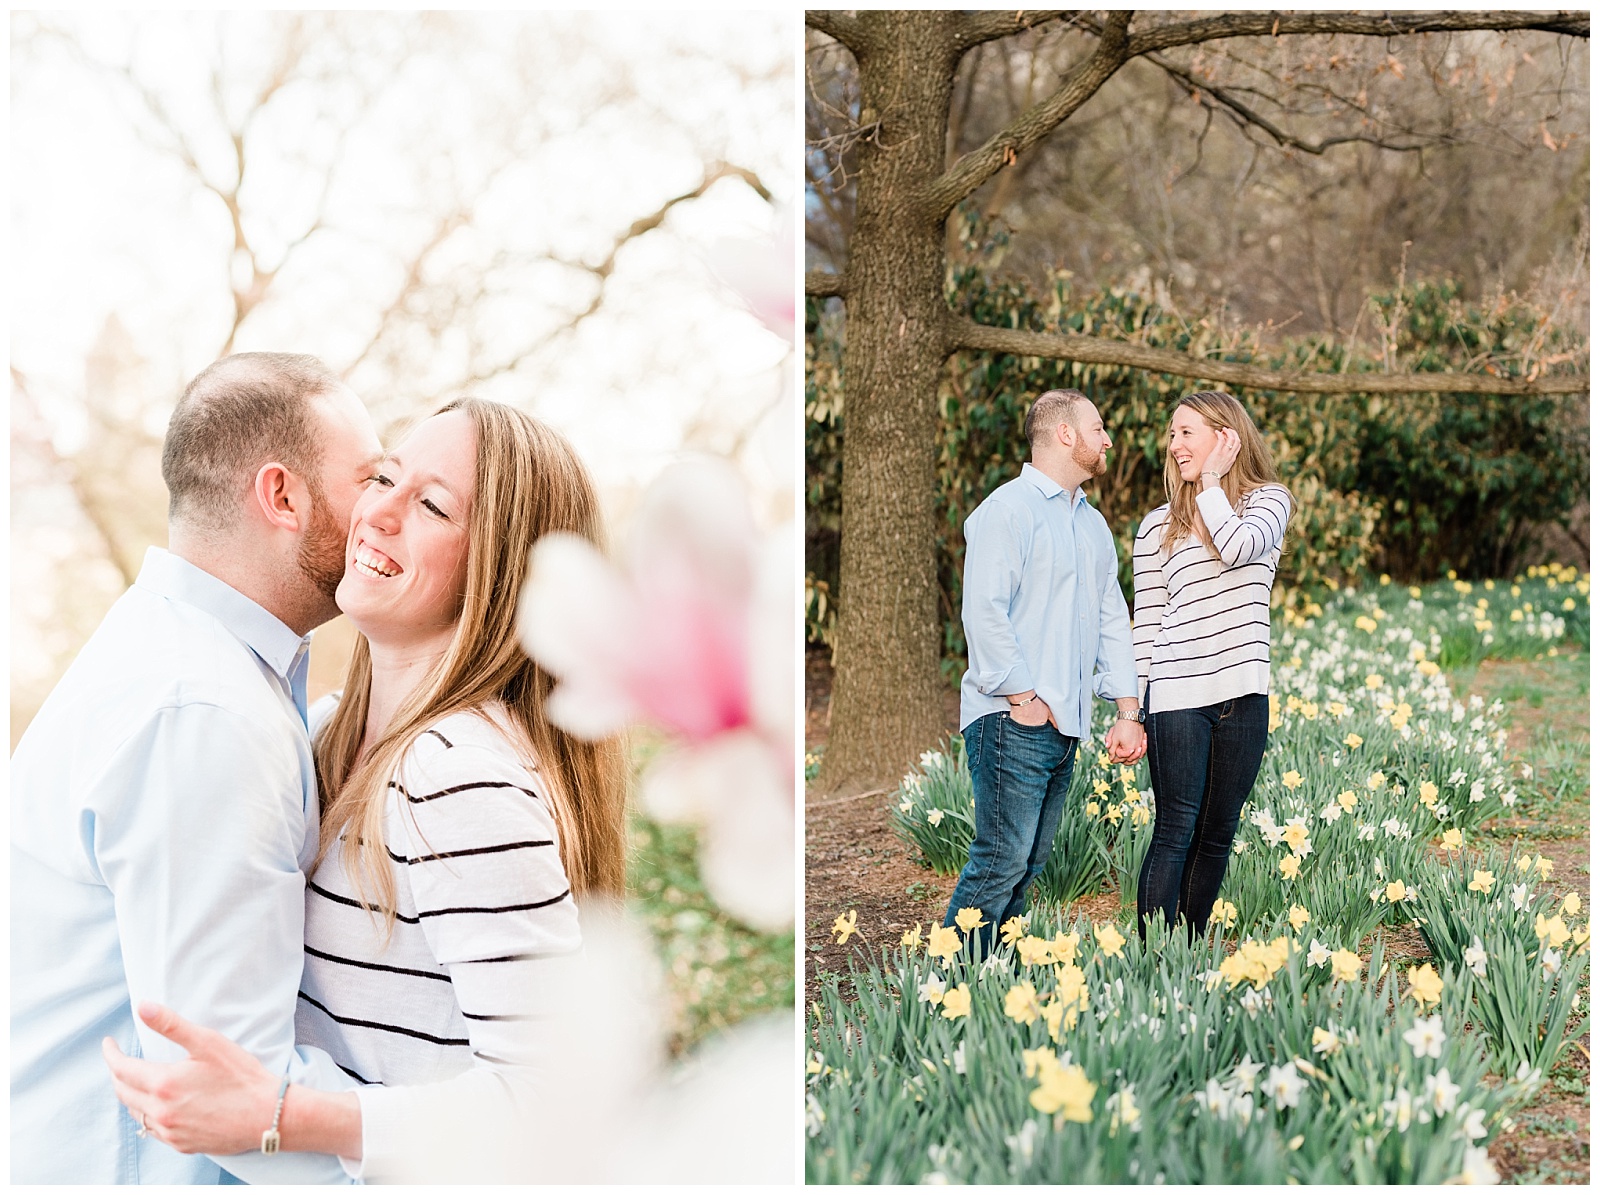 Central Park, NYC engagement session, springtime, wedding photographer, New York, flowers, spring, blooms